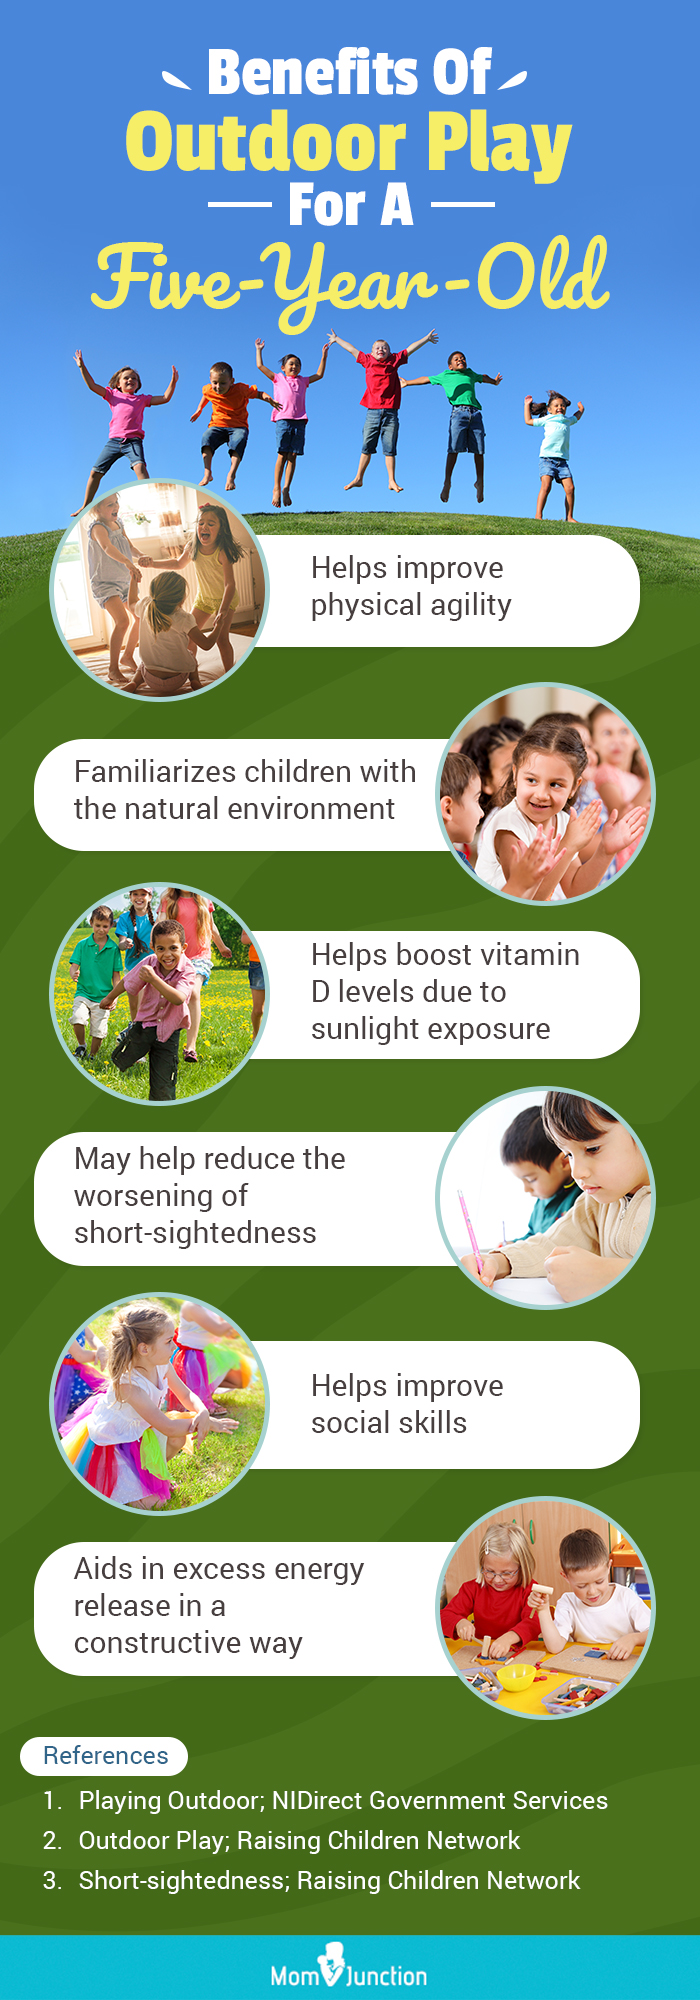 Benefits-Of-Outdoor-Play-For-A-Five-Year-Old (infographic)